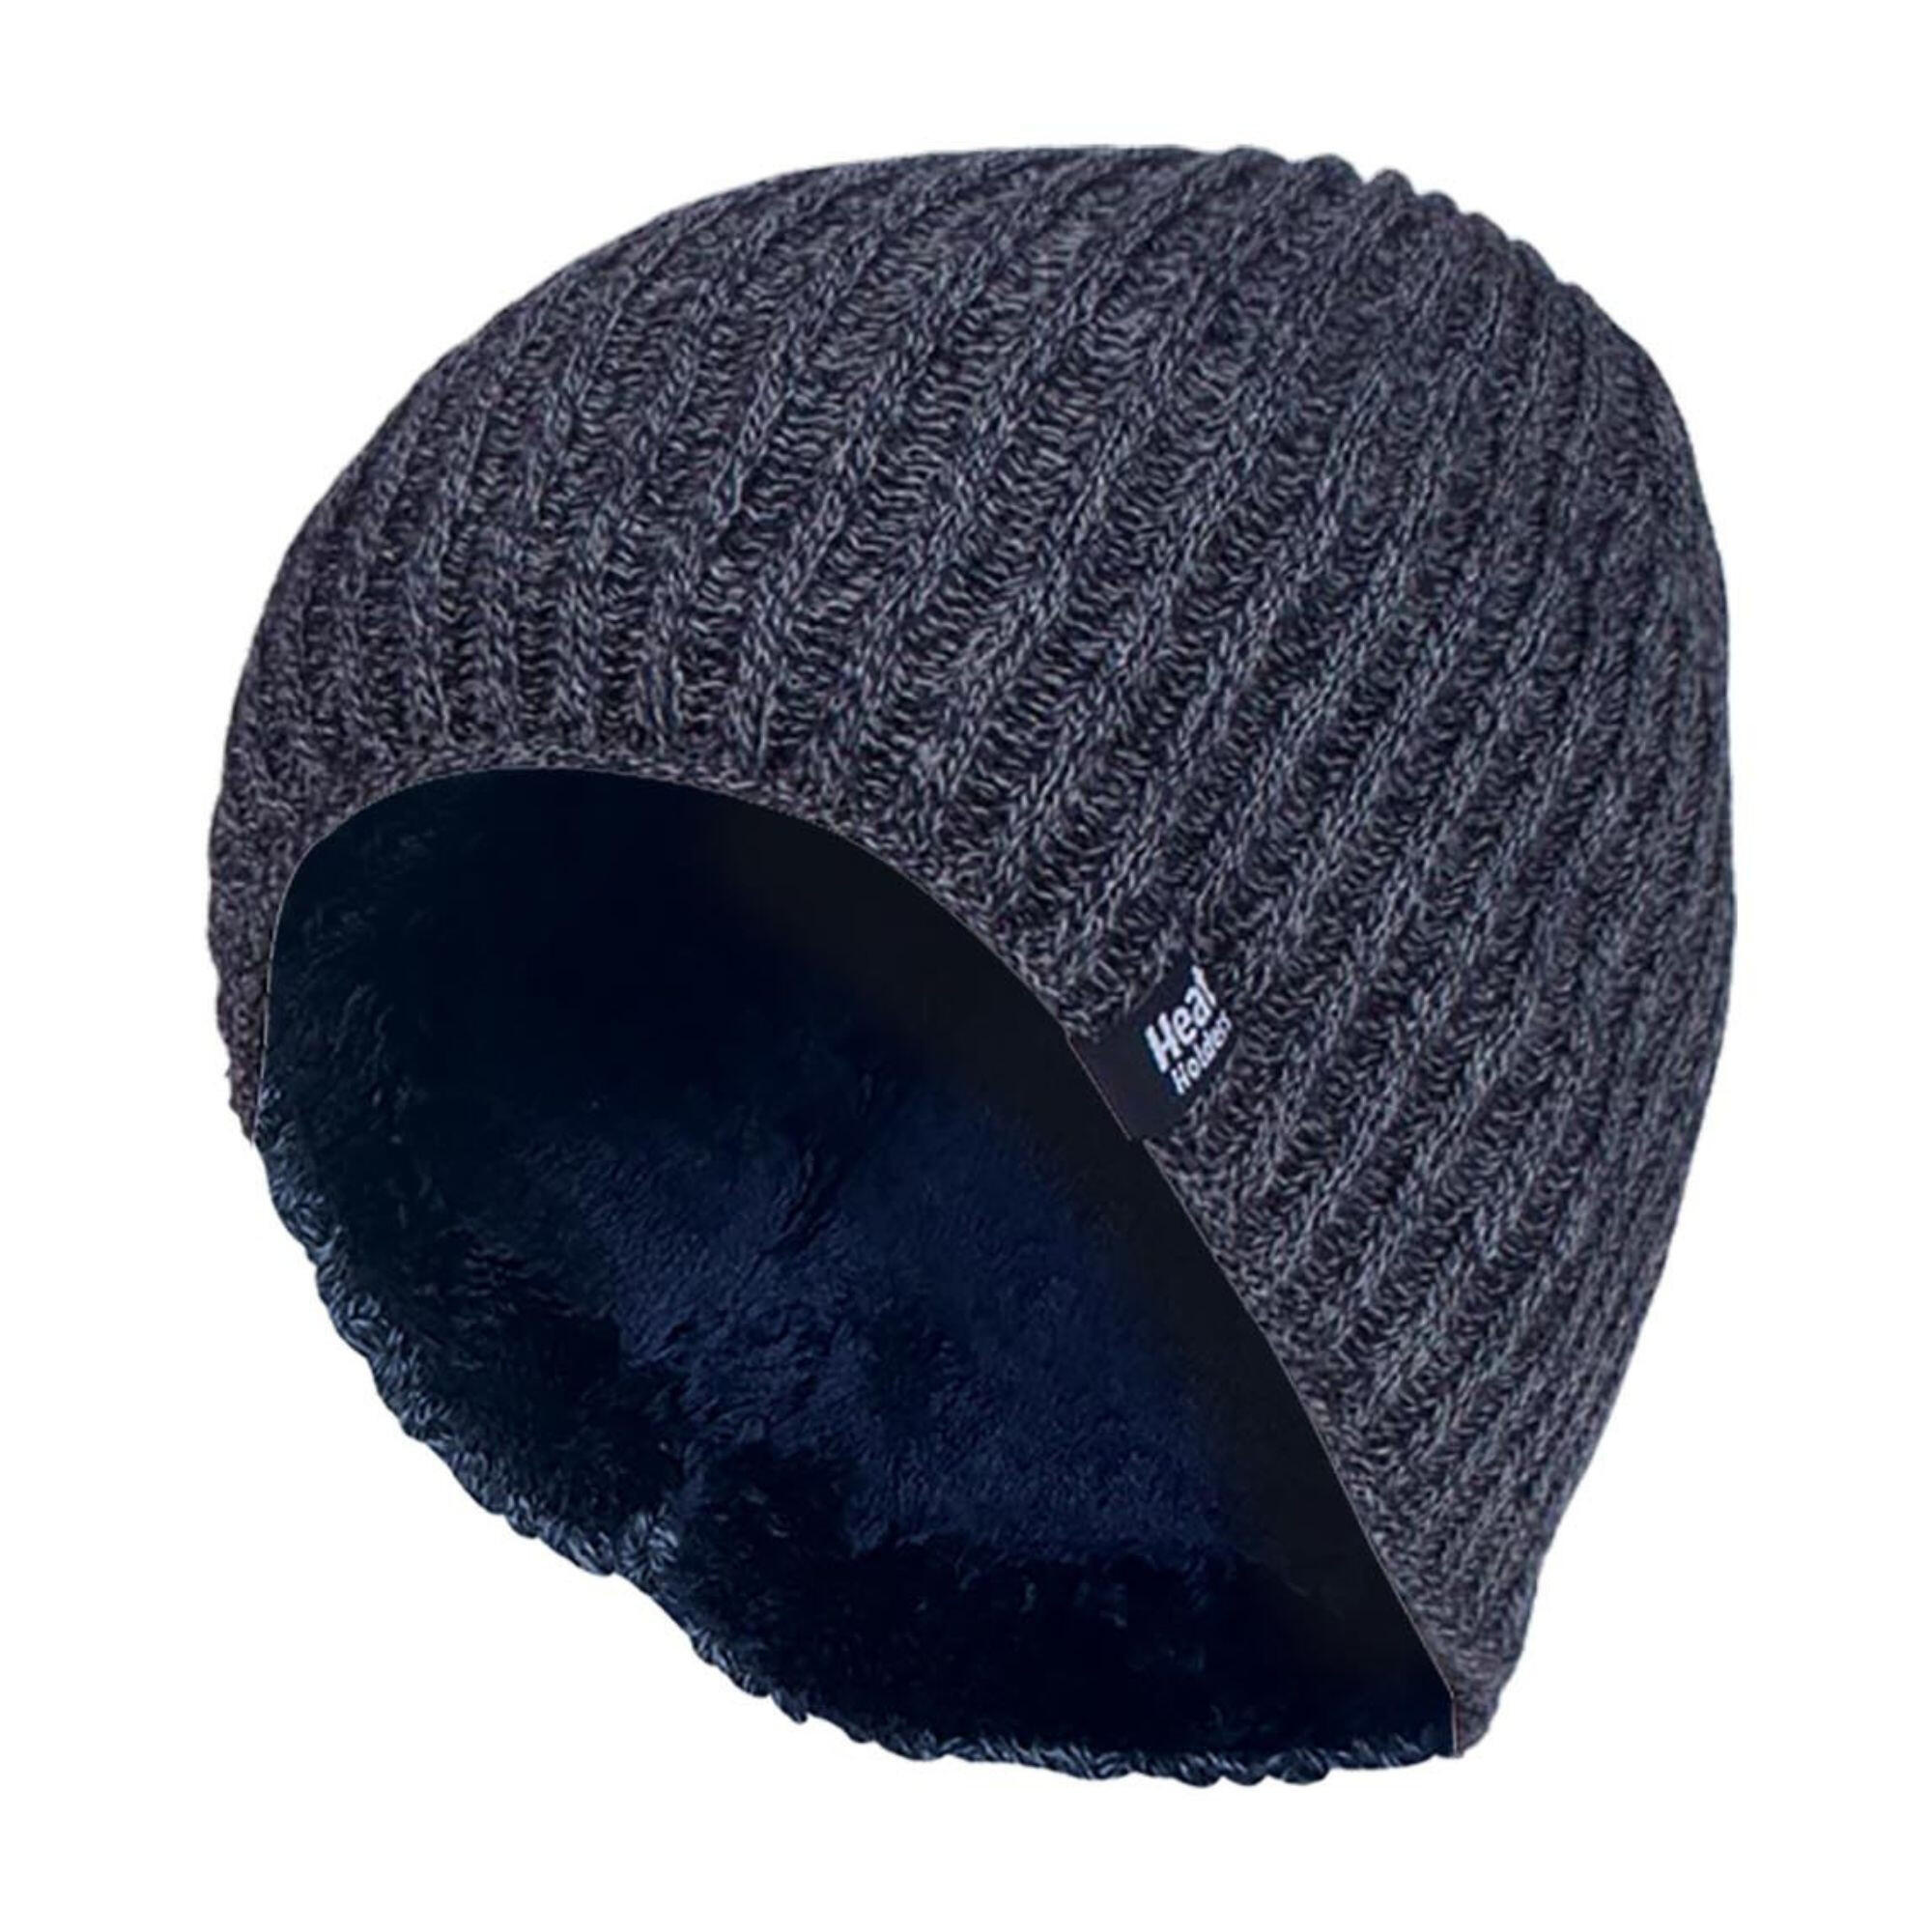 Mens Fleece Lined Thermal Winter Knitted Beanie Hat 1/4